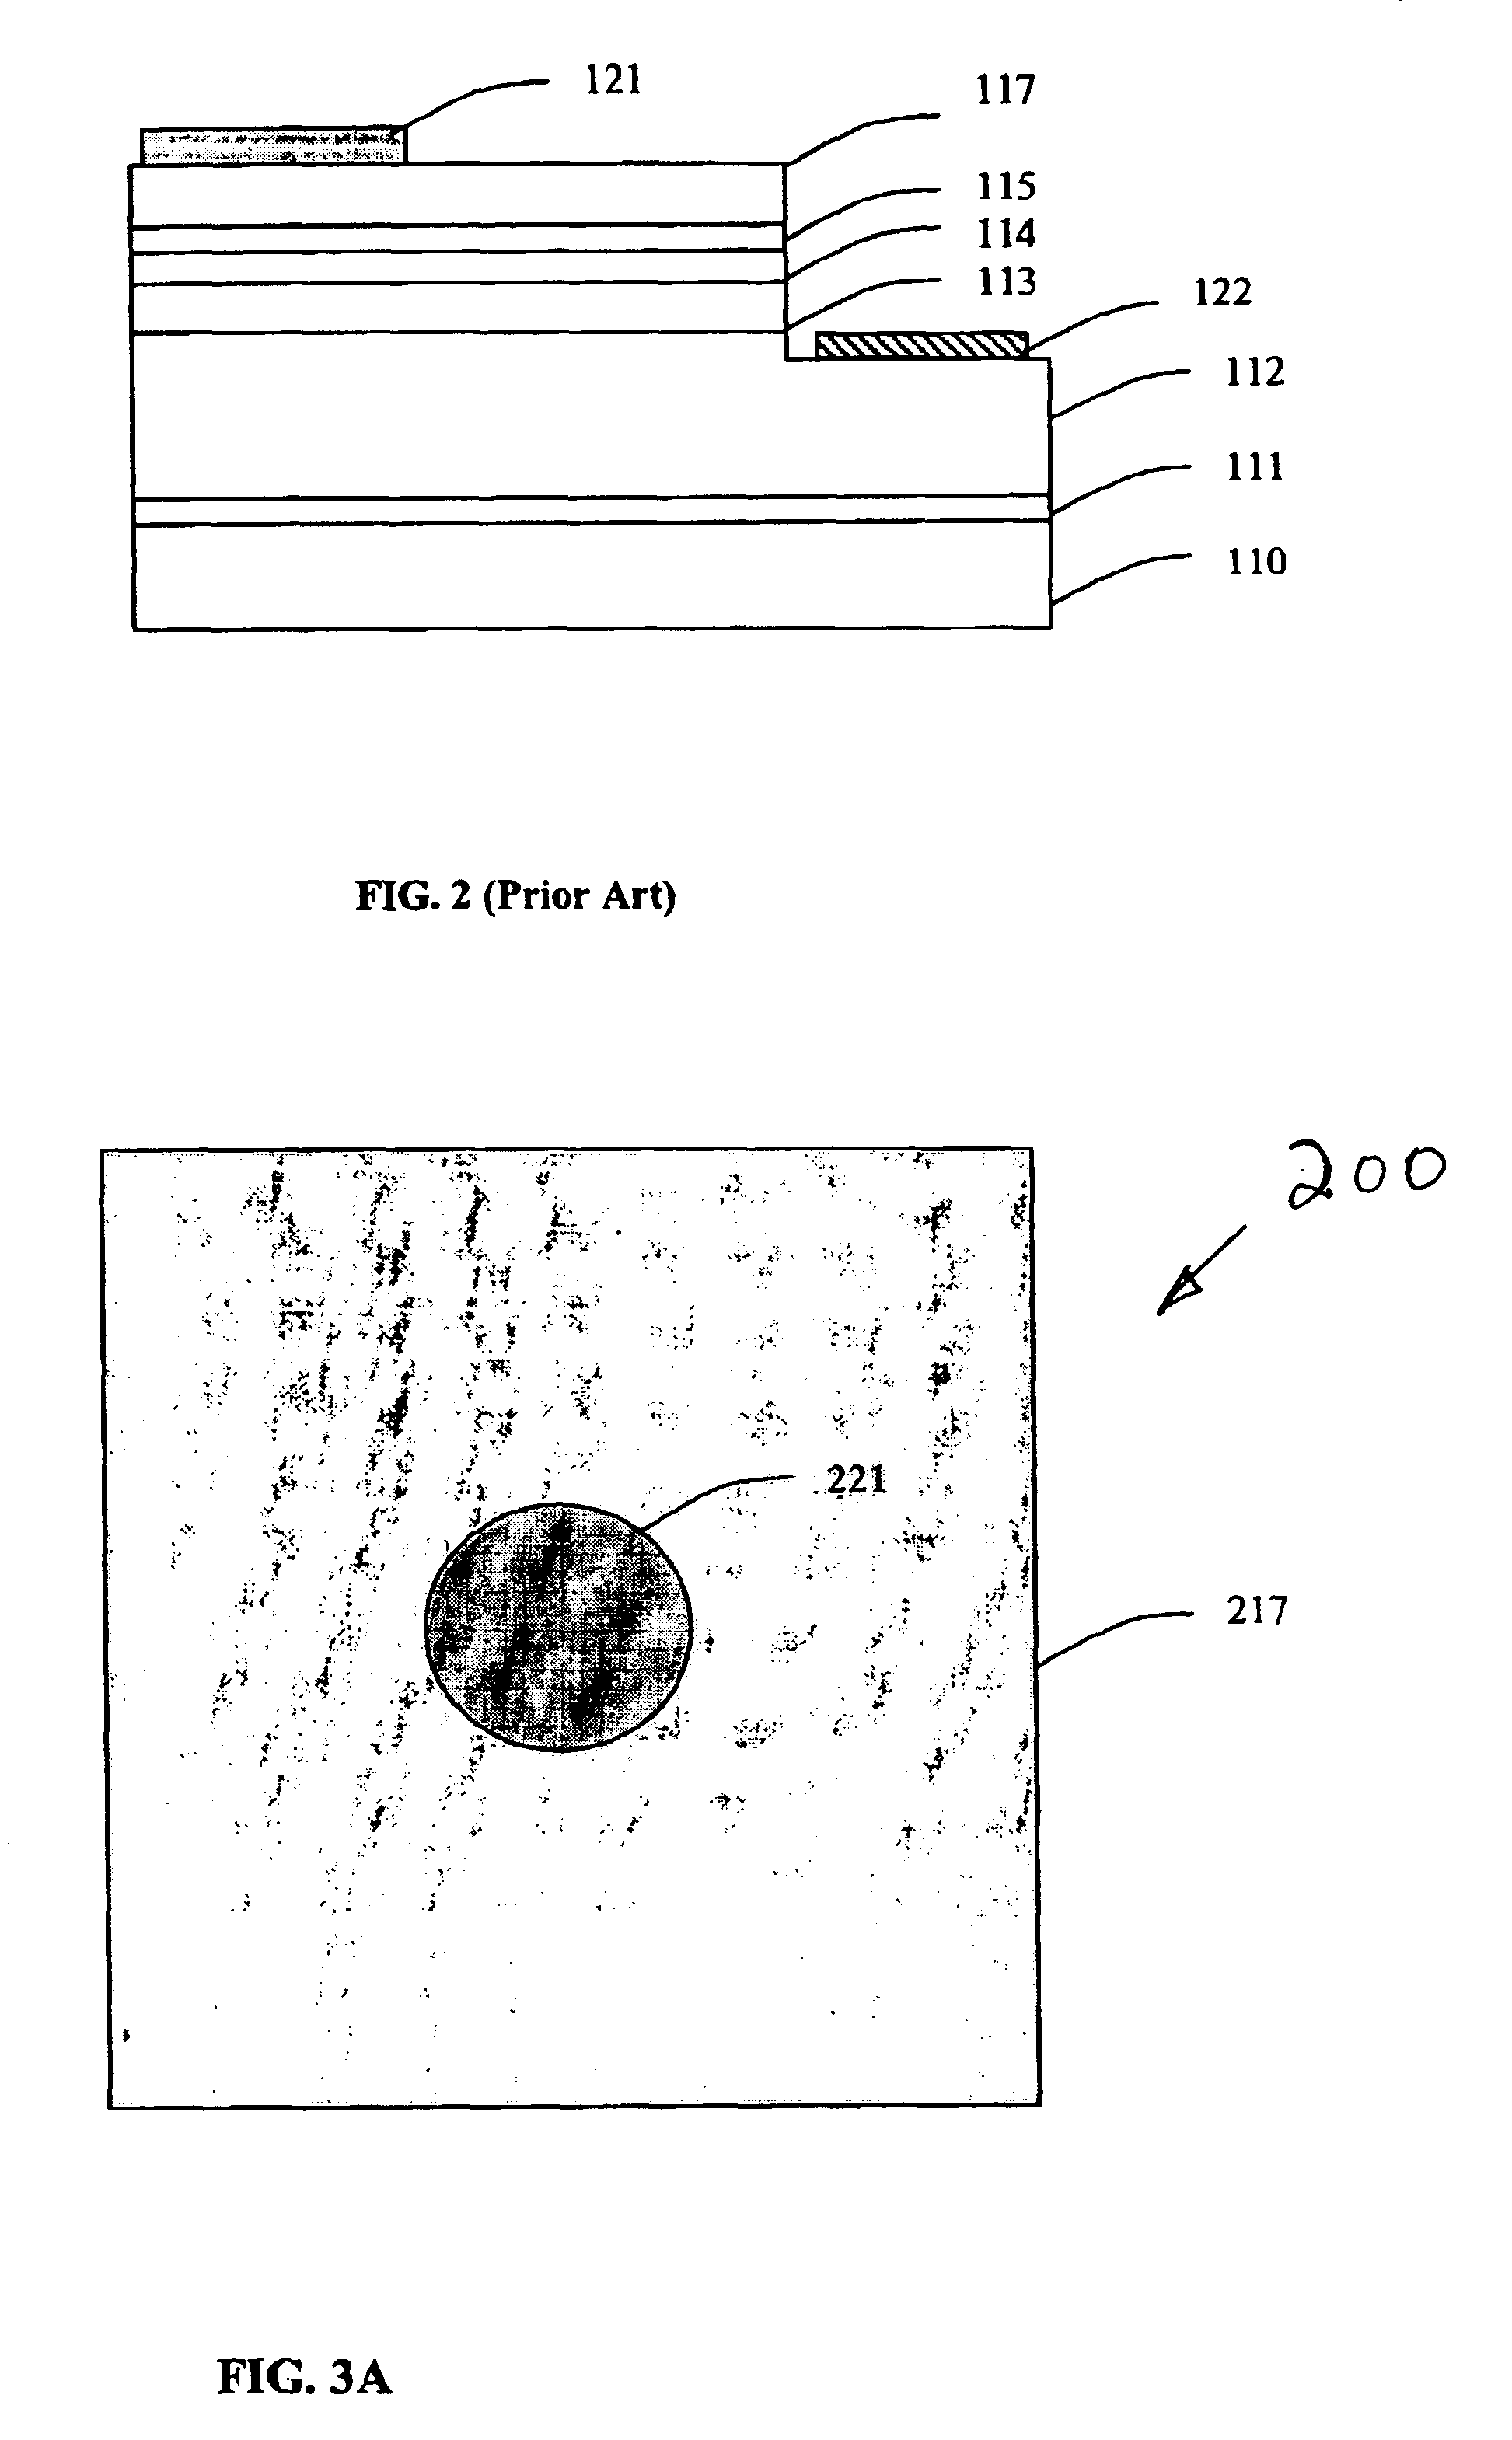 Light emitting diodes with current spreading layer